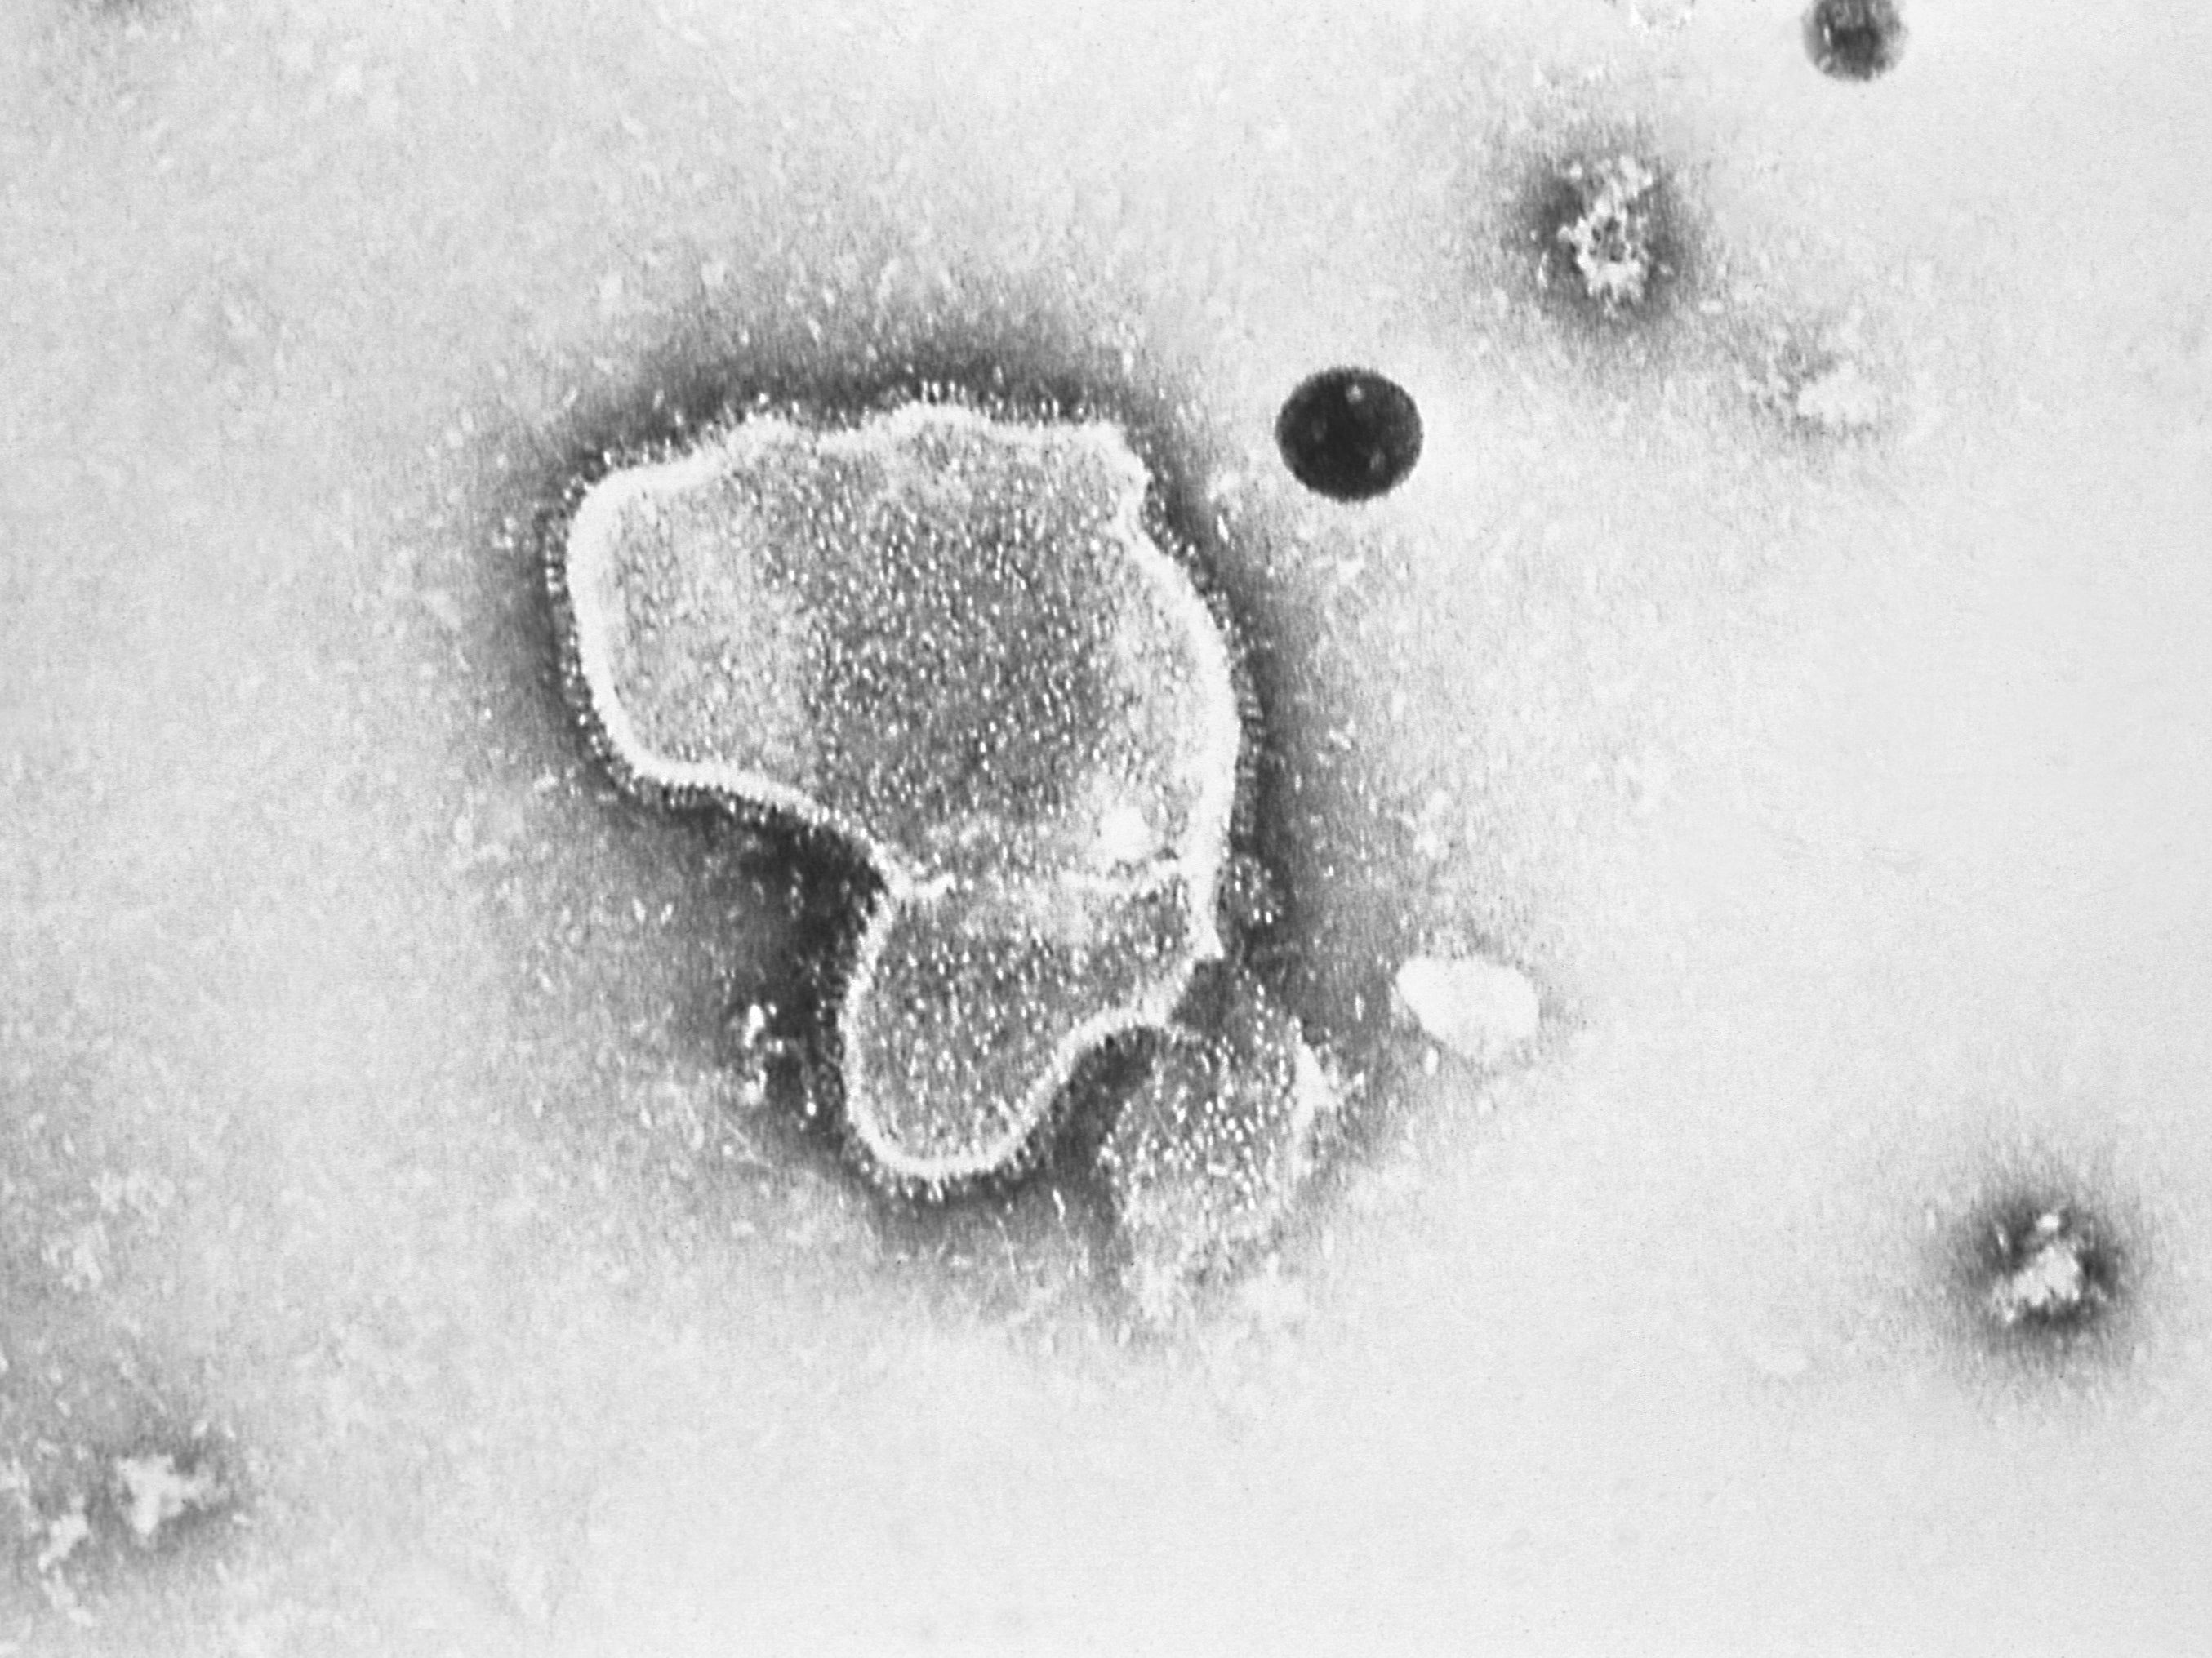 An electron micrograph of respiratory syncytial virus, or RSV